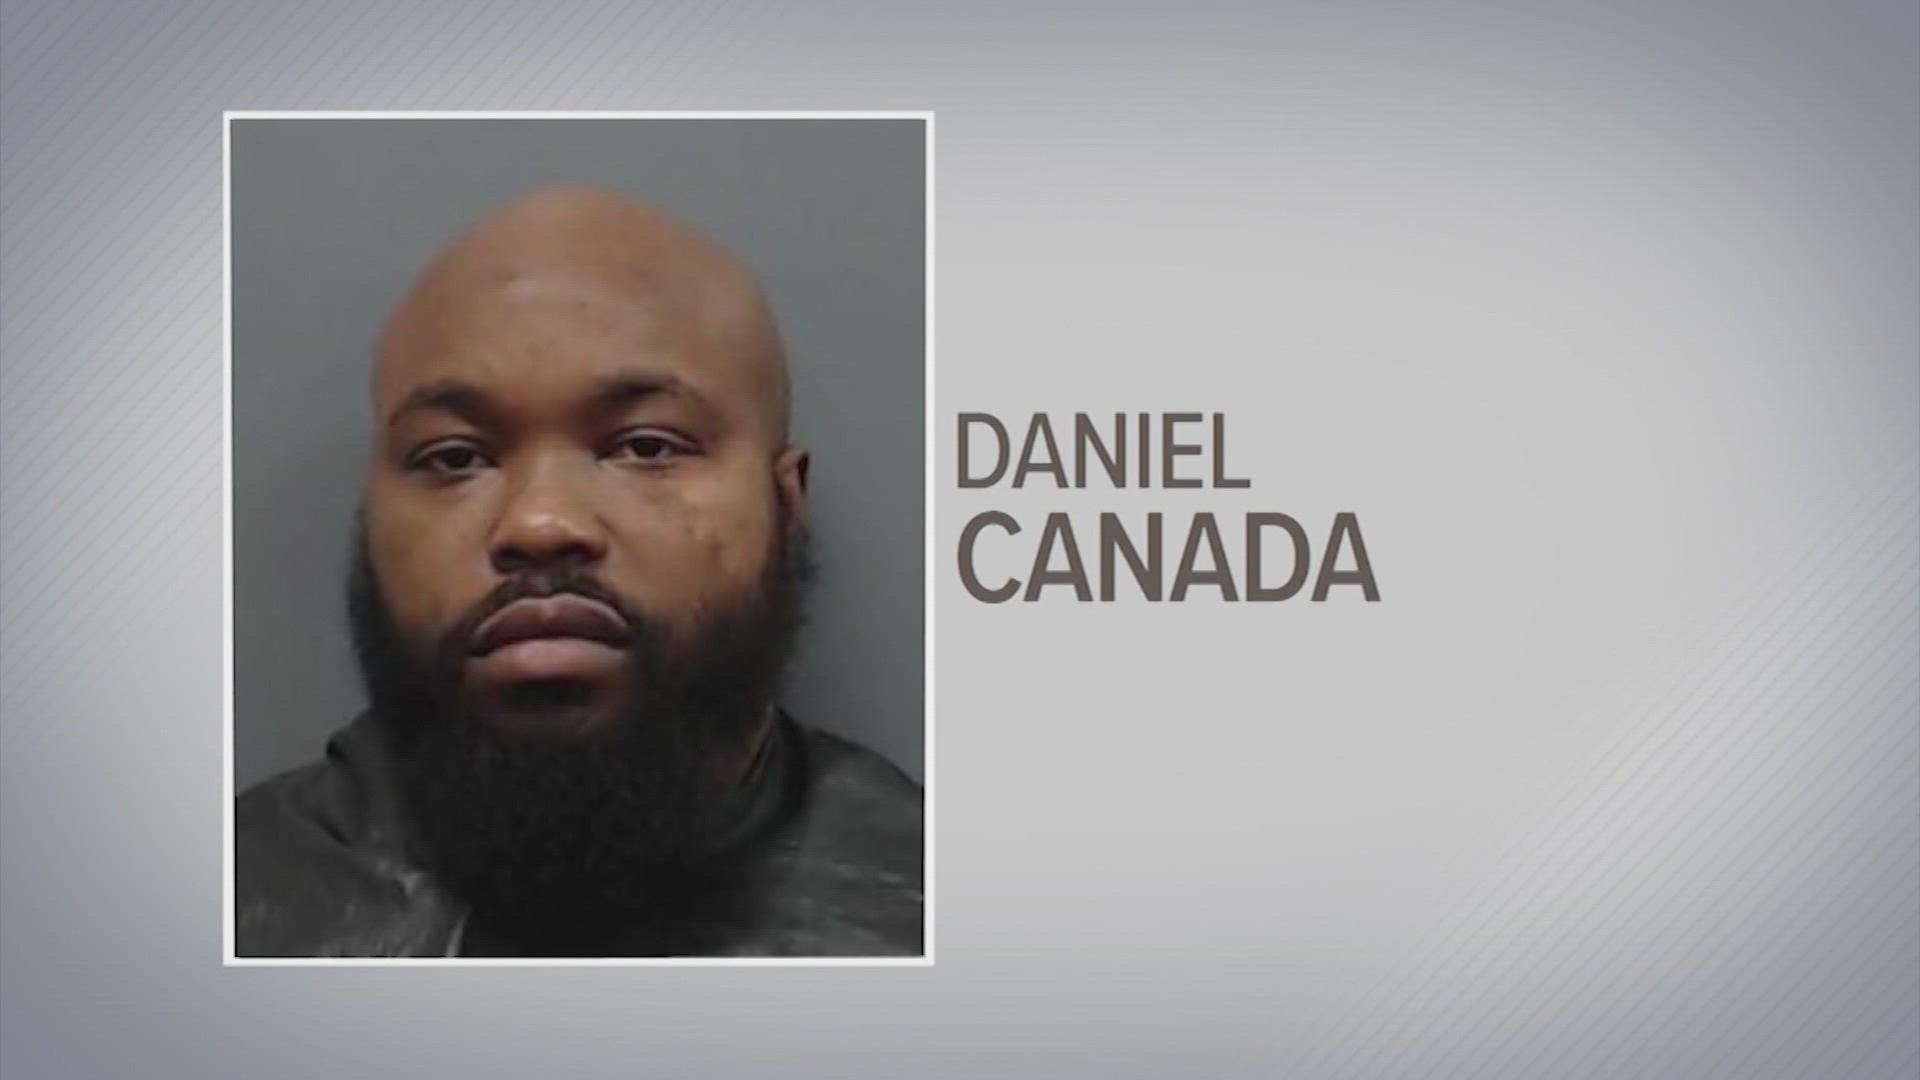 Daniel Canada was driving about 100 mph on FM 2920 when he crashed into Porsha Branch's car, killing her and her three sons.